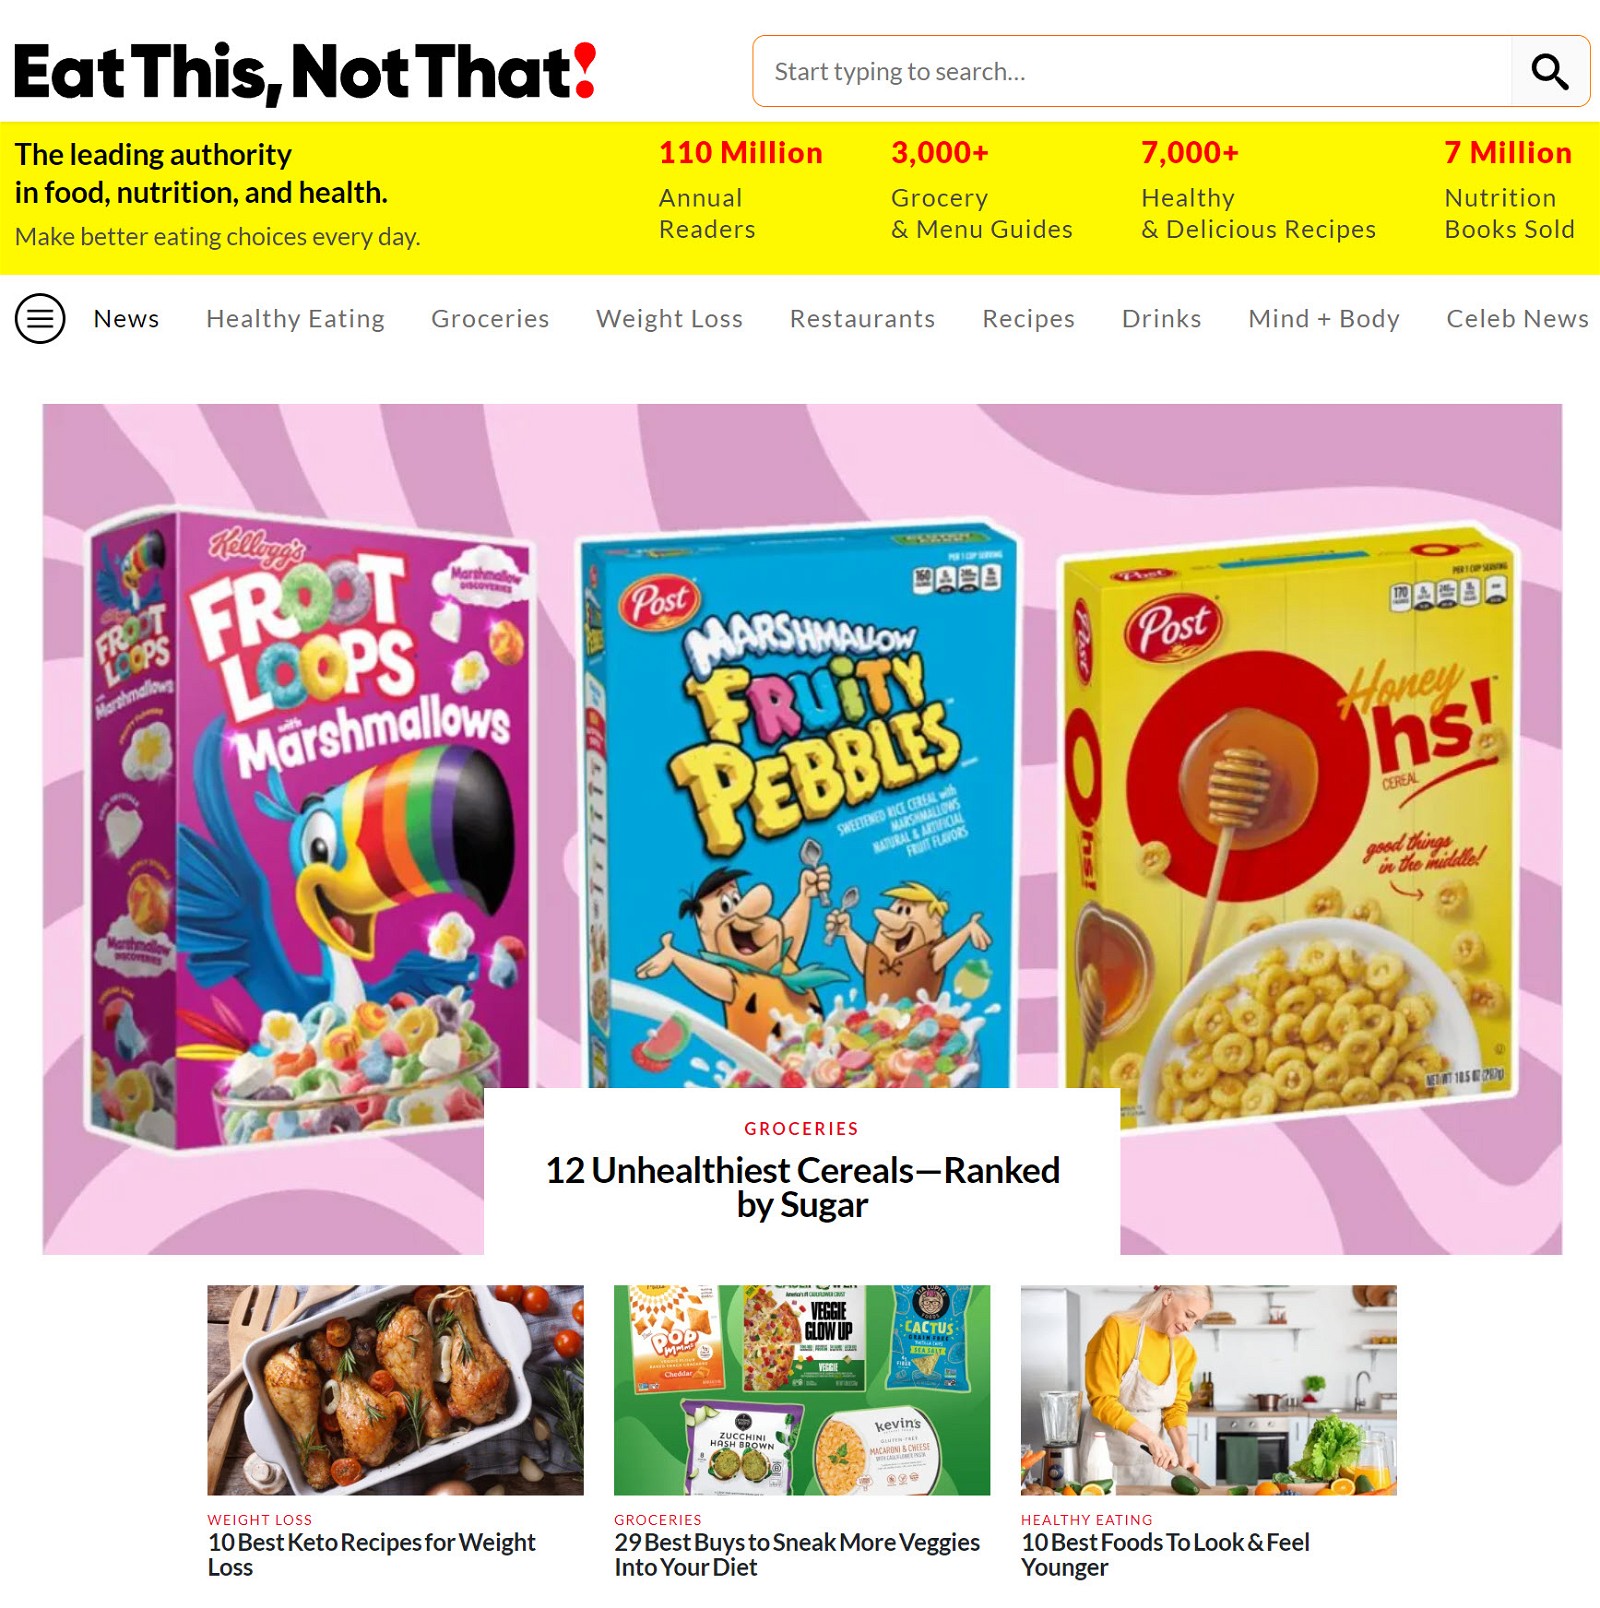 Eat This, Not That! homepage